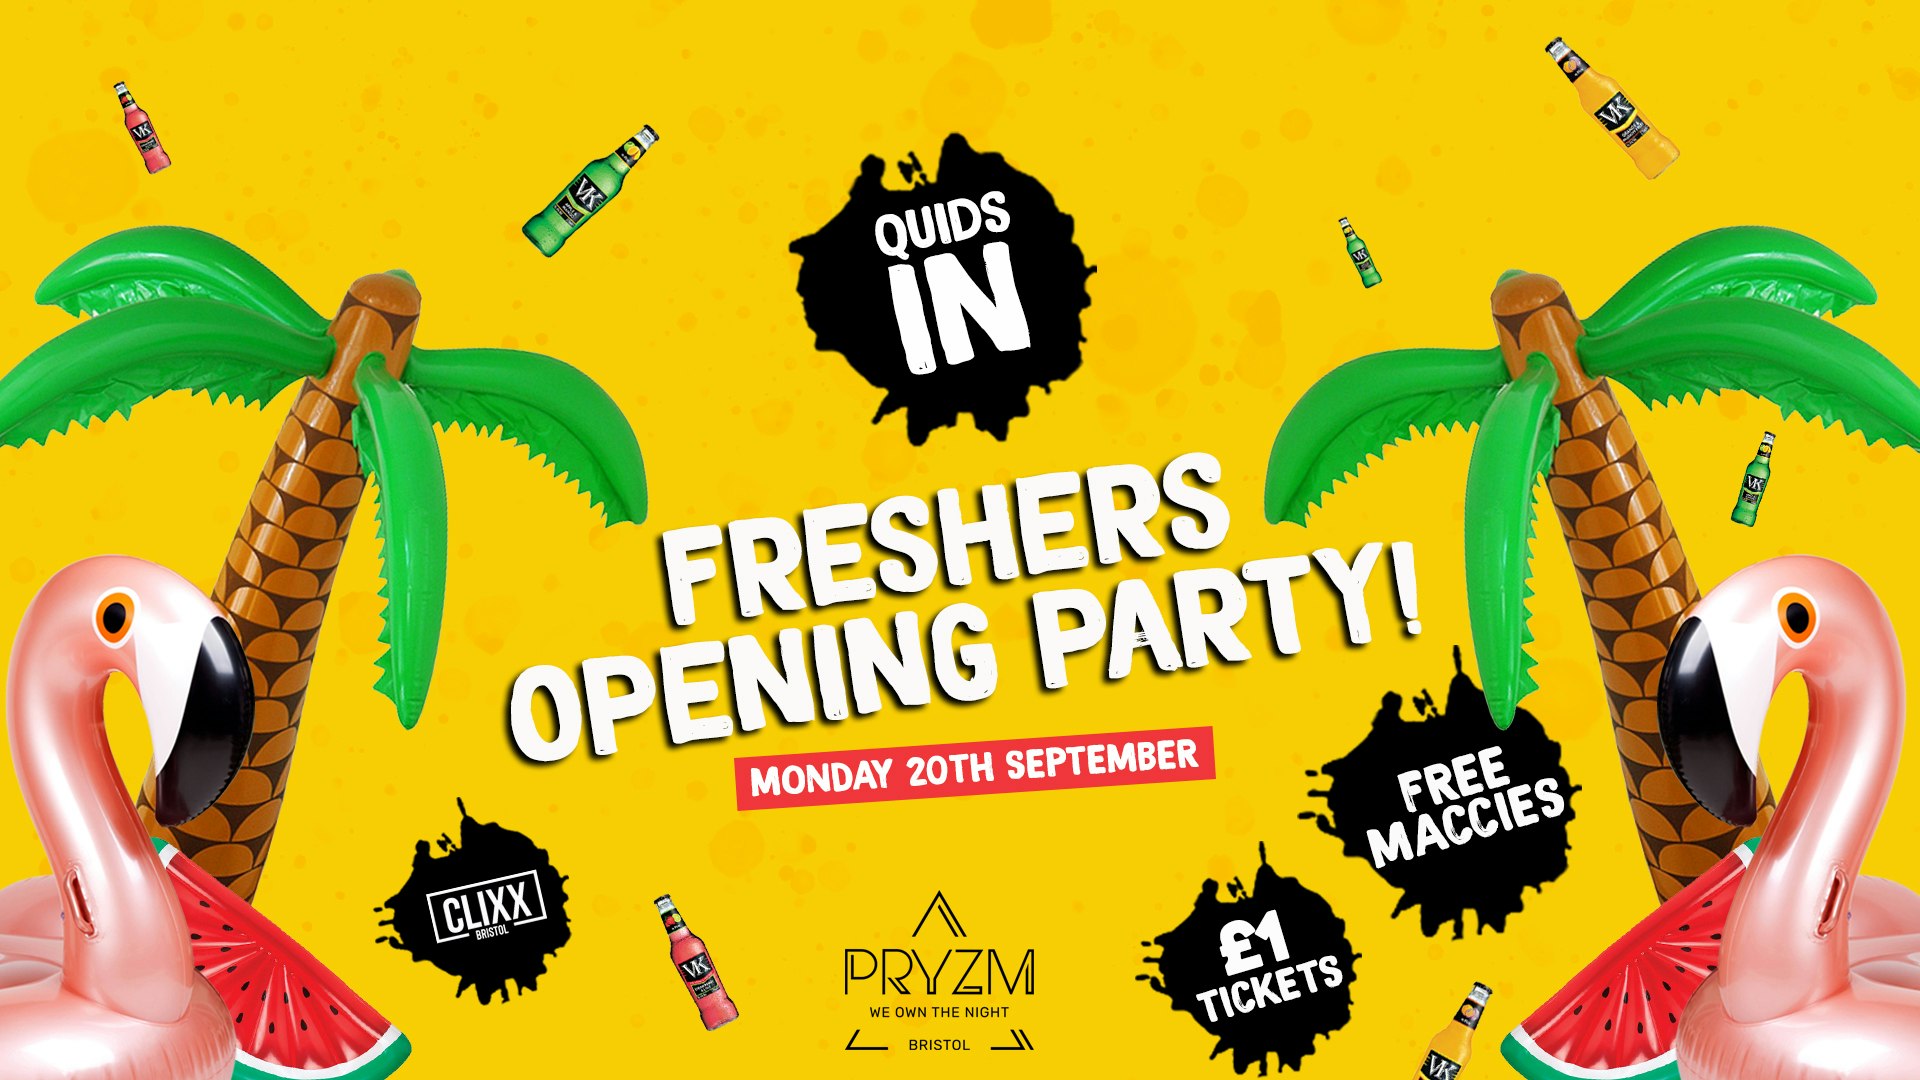 QUIDS IN / Freshers Opening Party – £1 Tickets